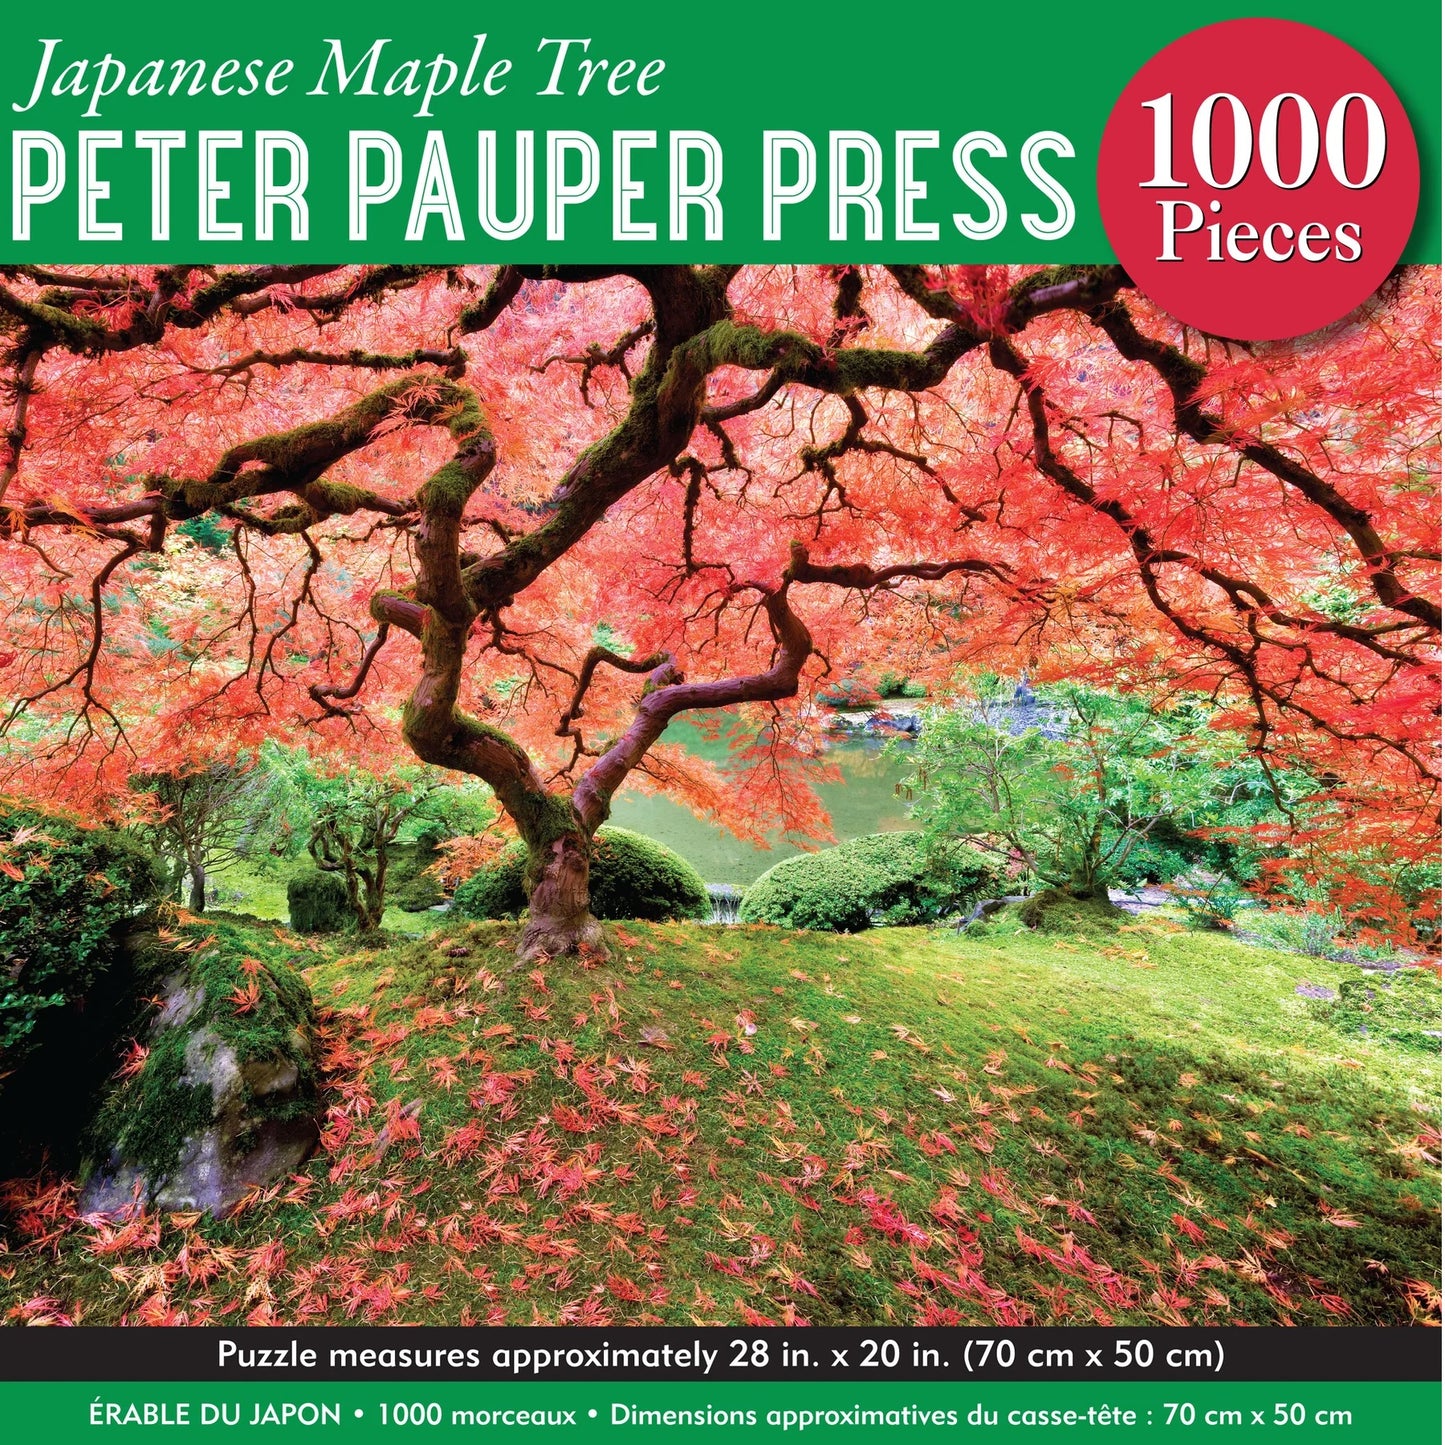 PPP Puzzle Japanese Maple Tree 1000pc